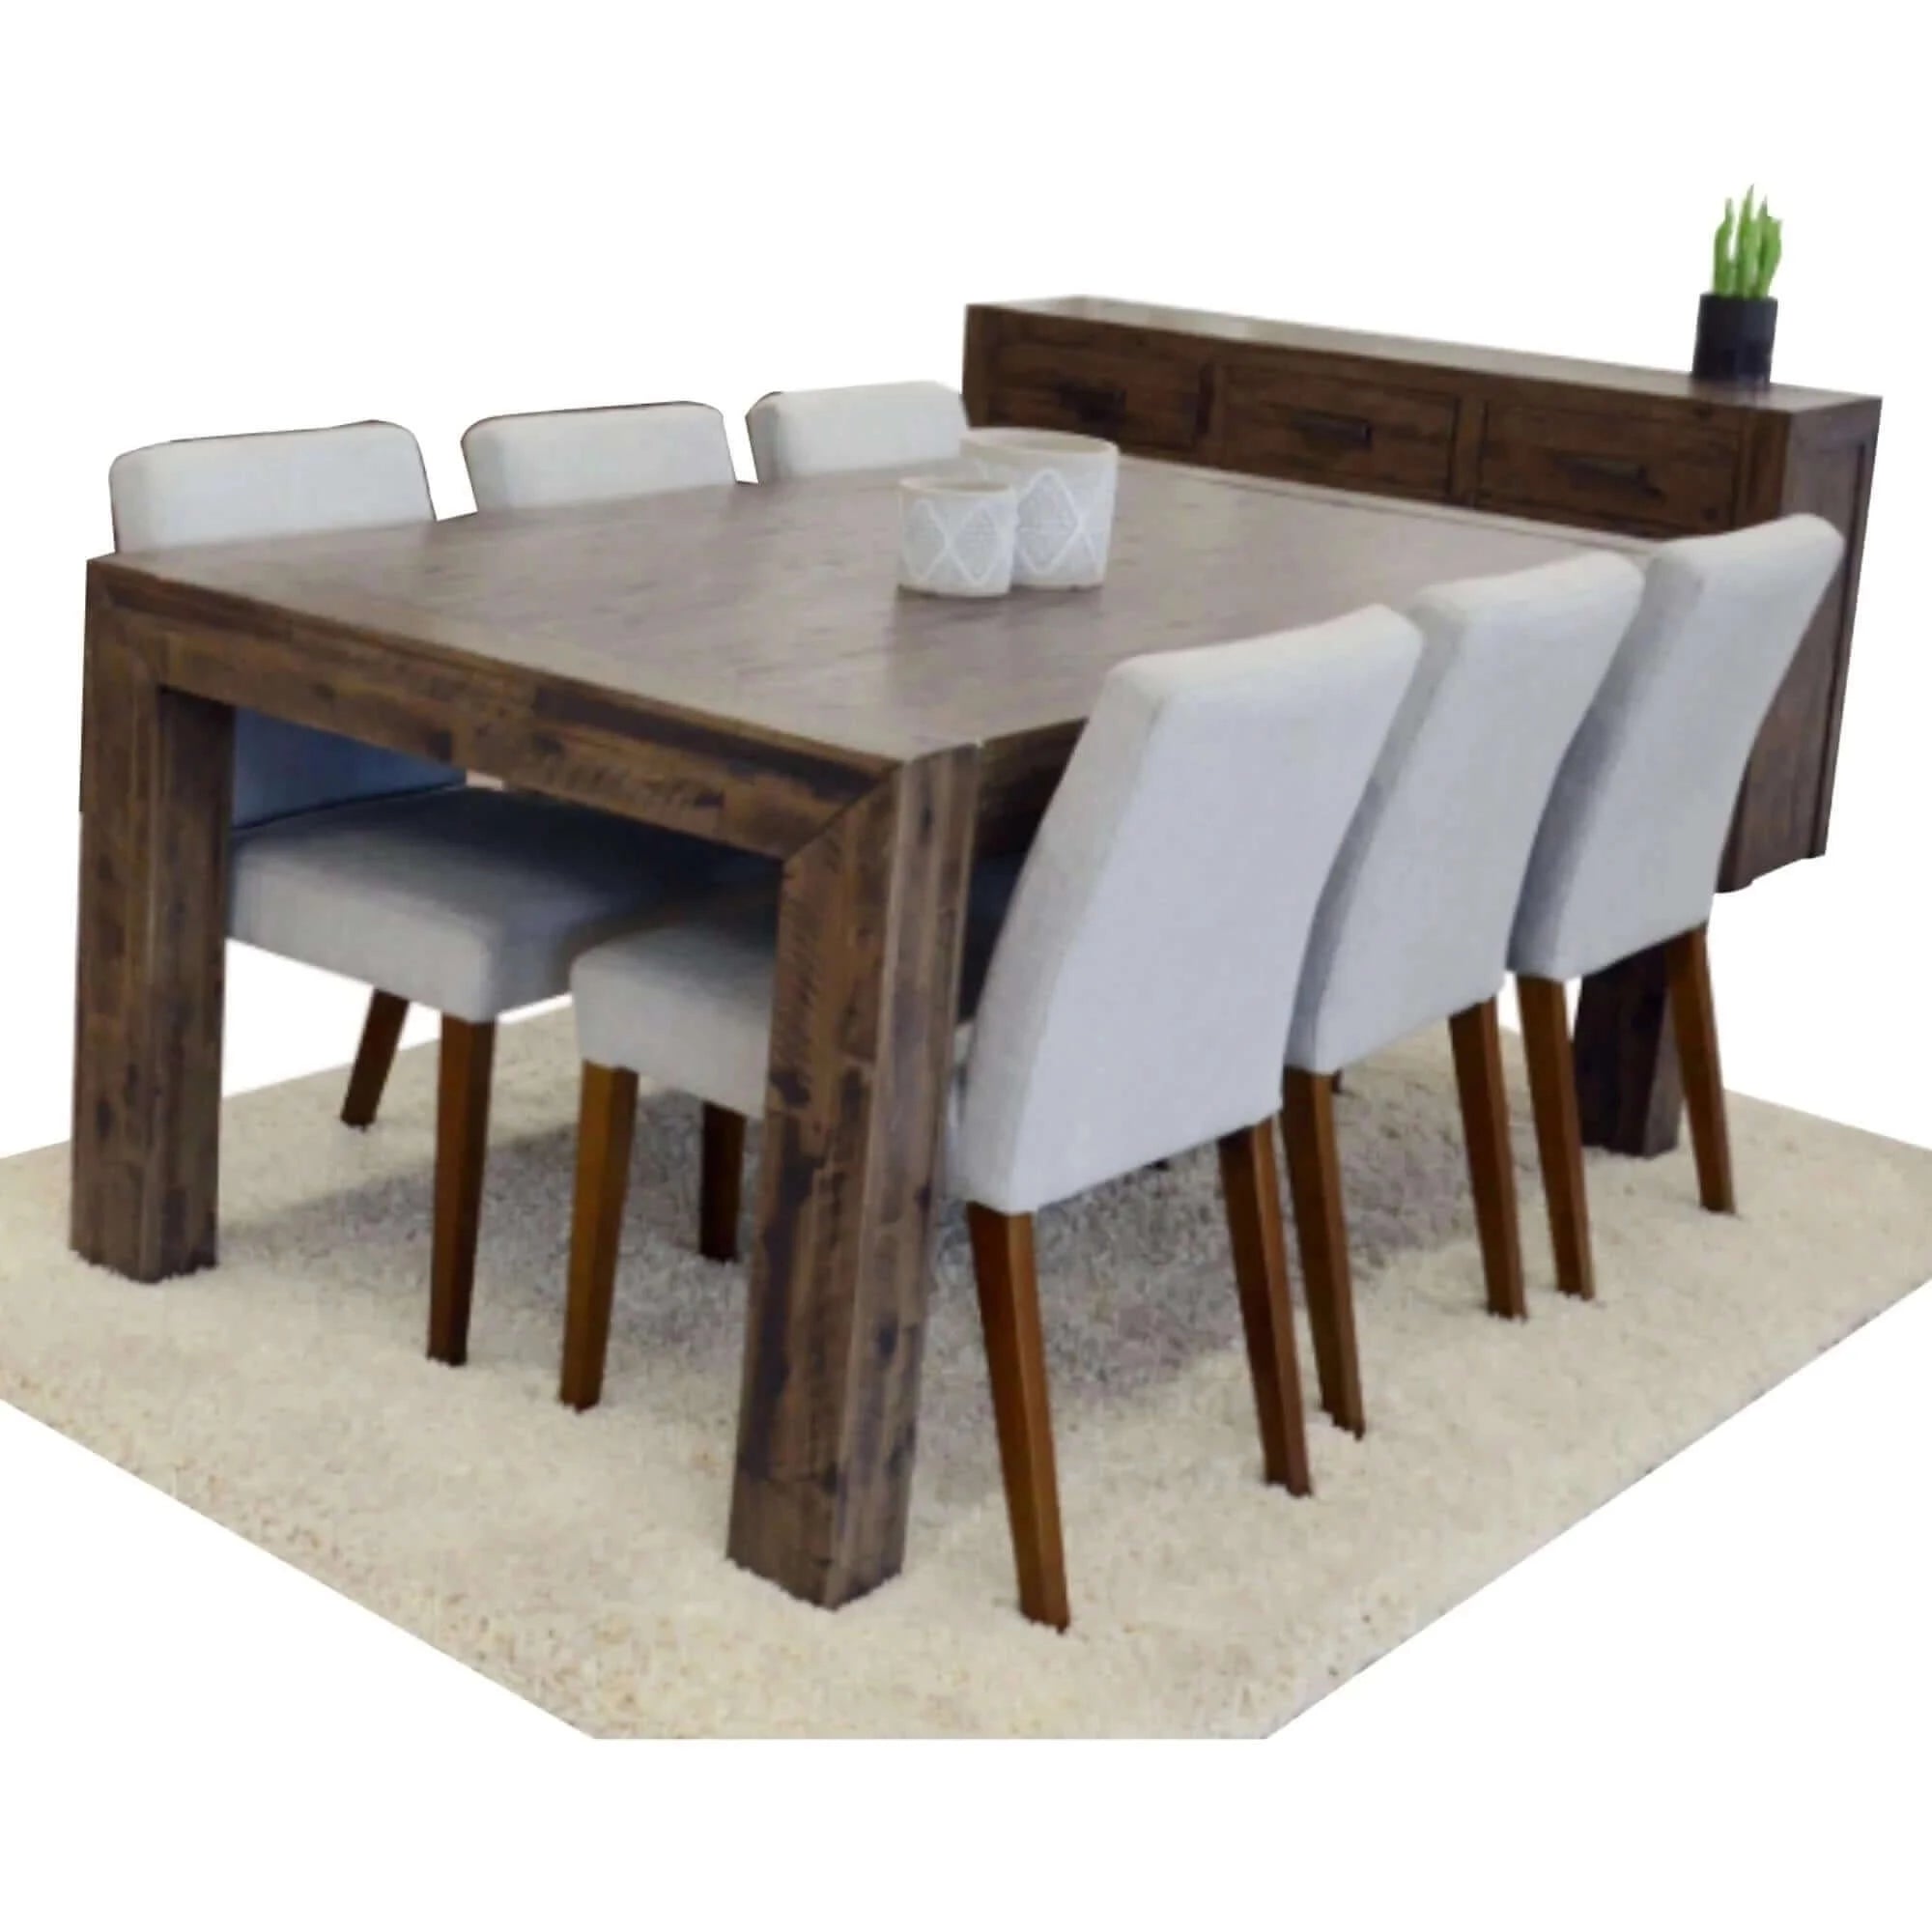 Buy catmint 7pc dining set 180cm table with 6 solid wood fabric chair - upinteriors-Upinteriors